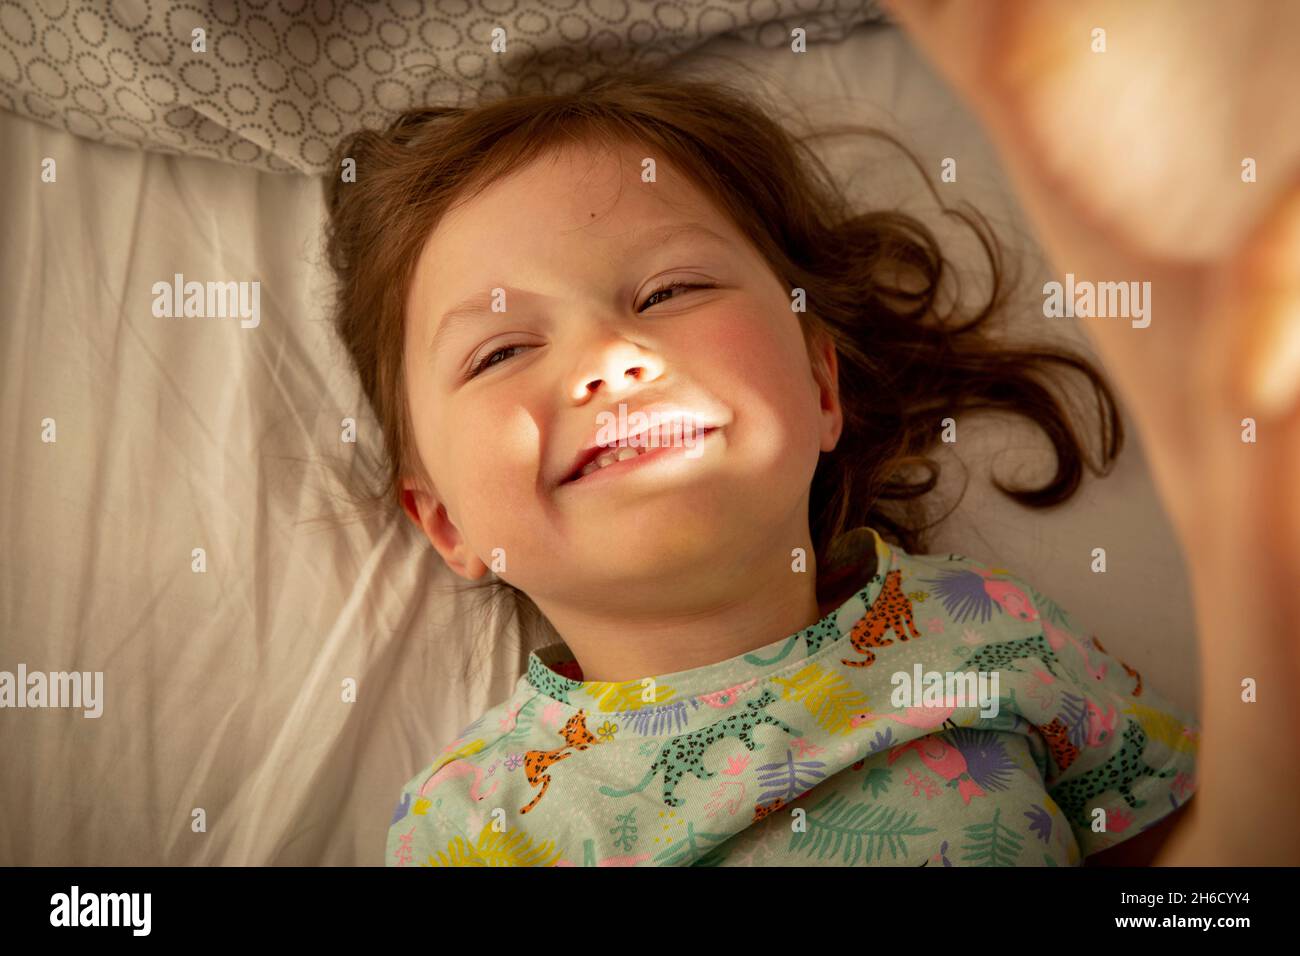 Adorable carefree baby girl smiling Stock Photo